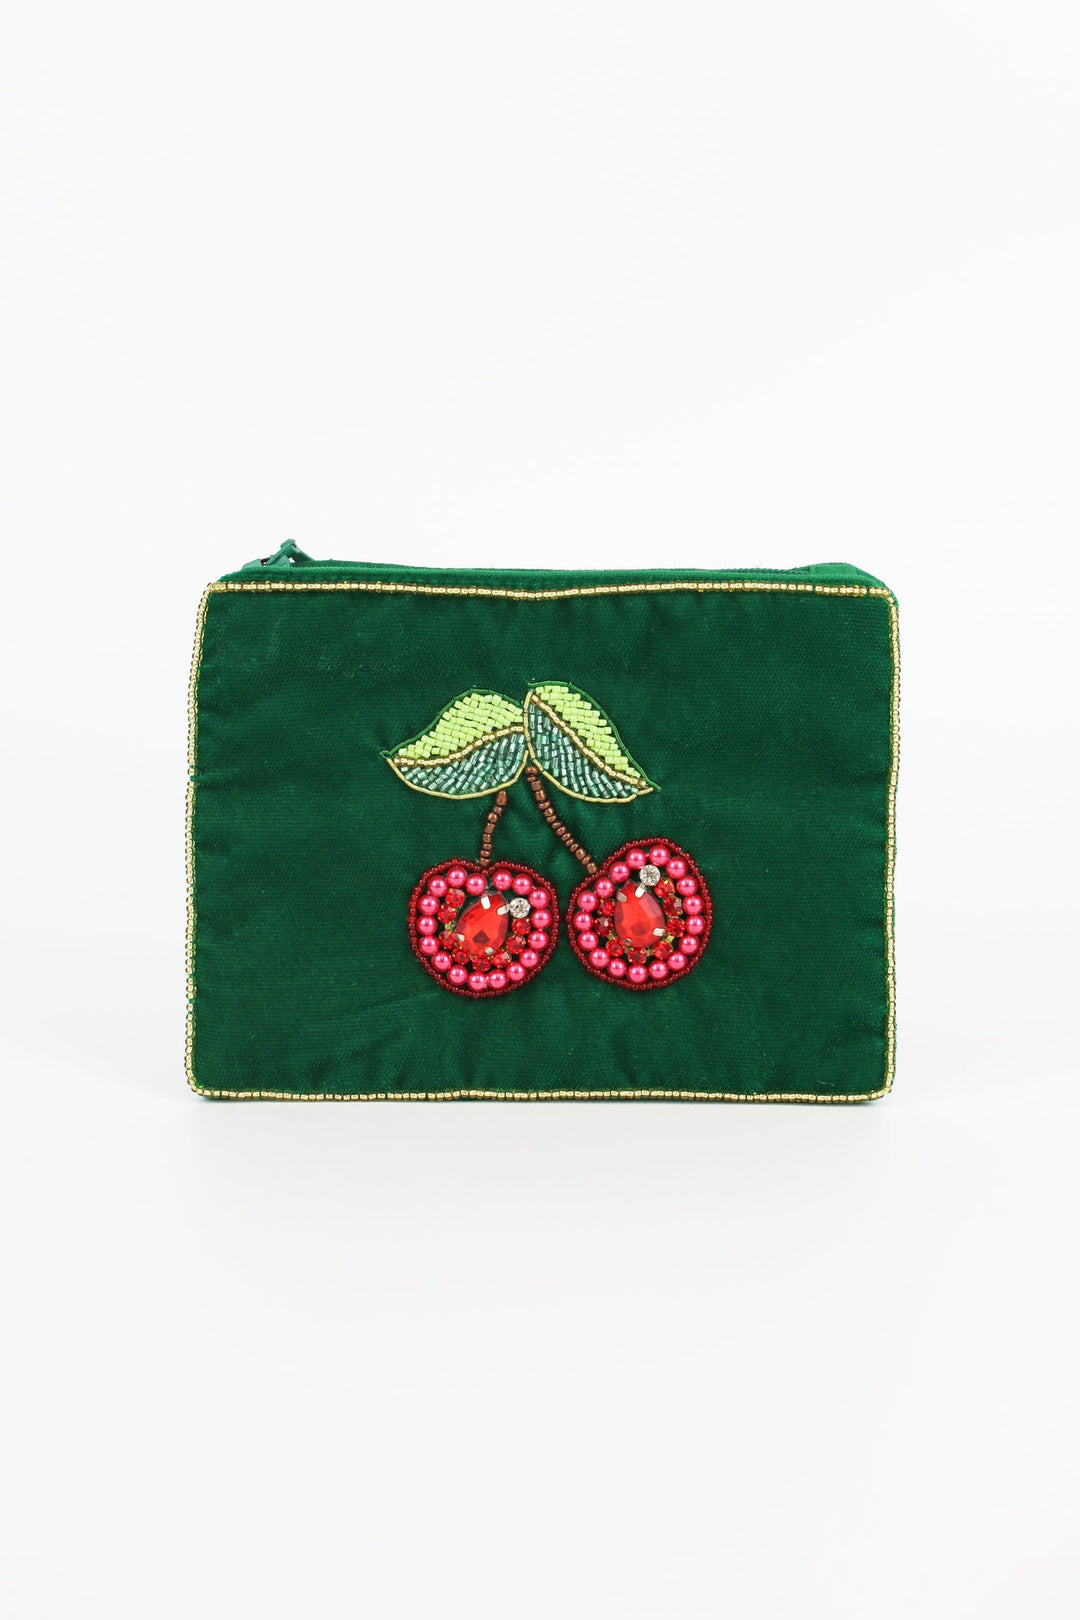 Vintage Red Cherry Beaded Coin Purse